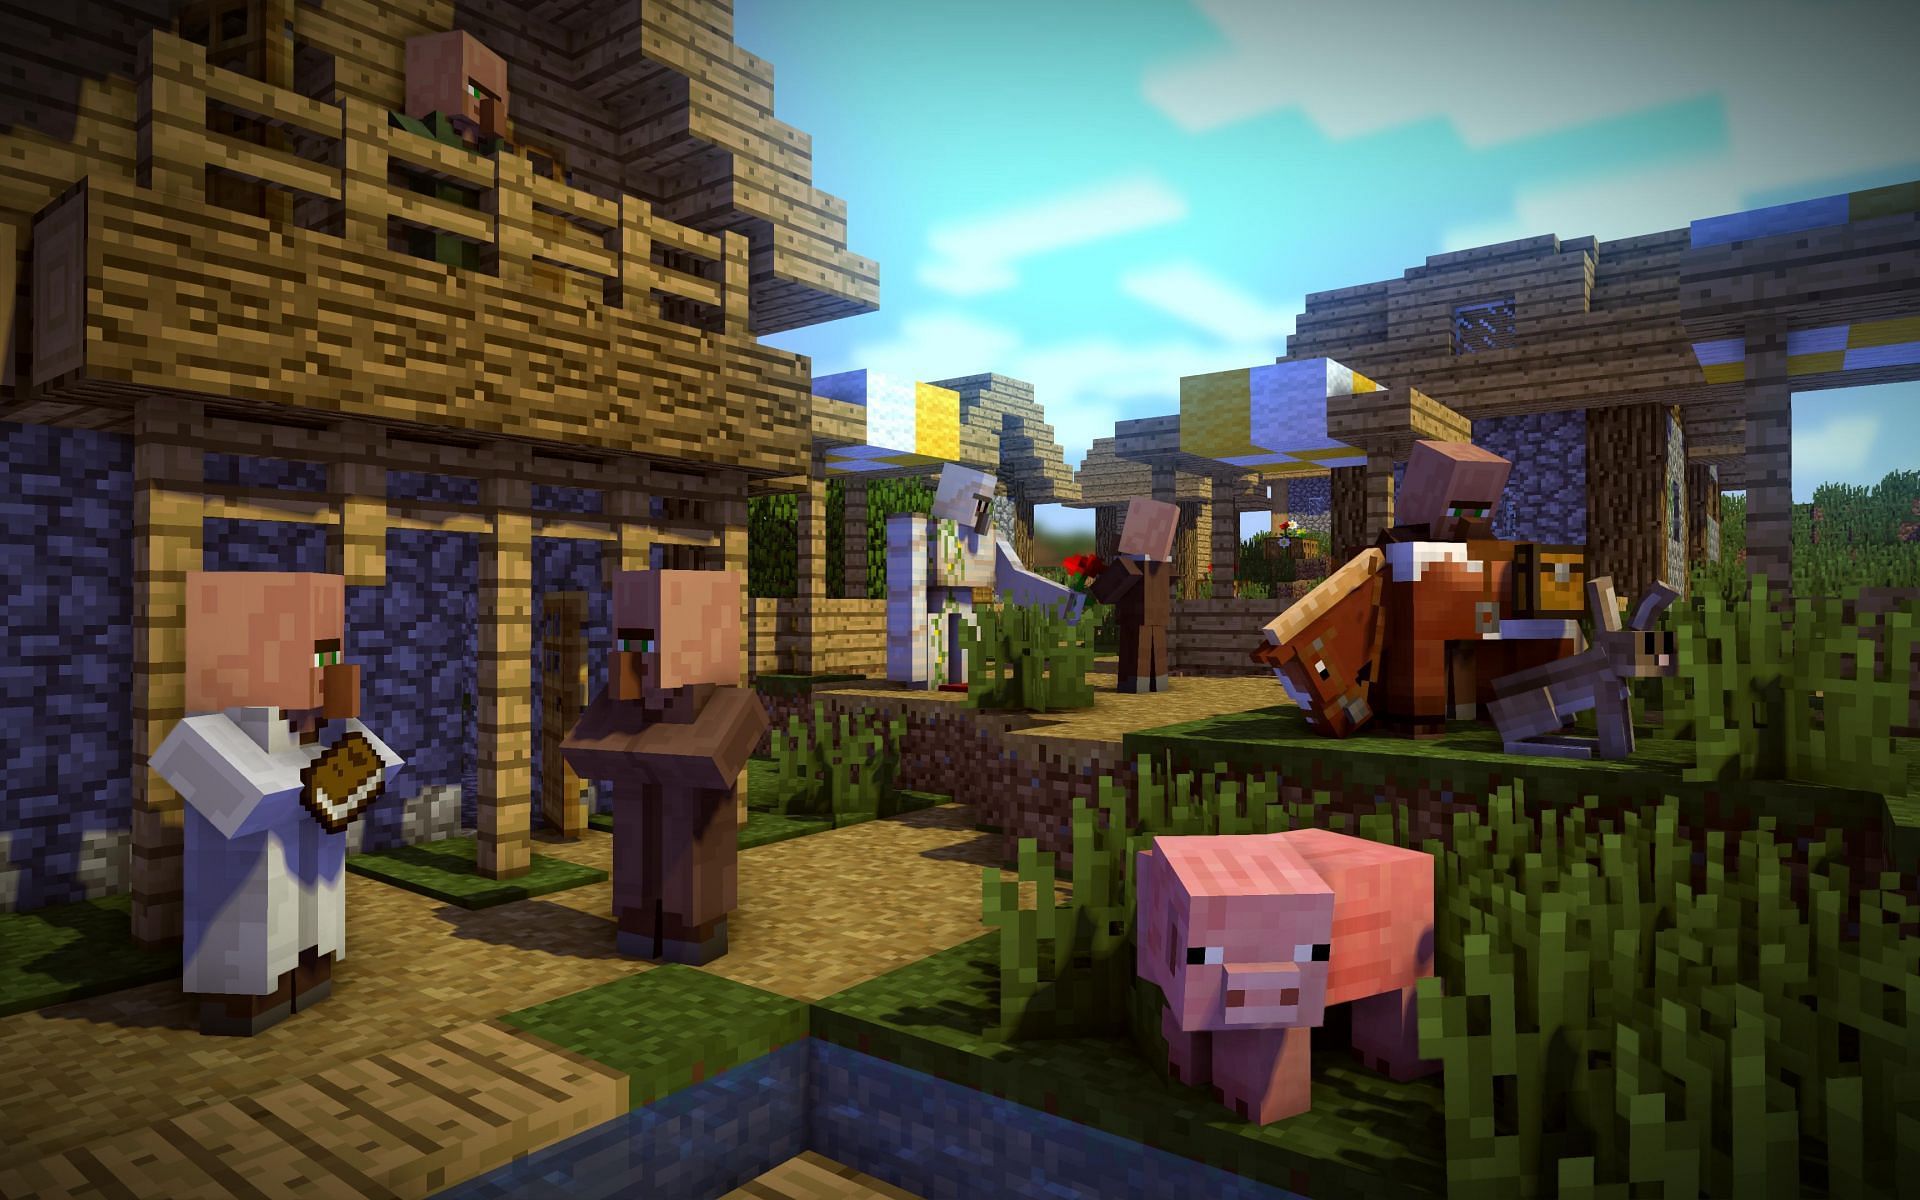 An image of a village in-game. (Image via Minecraft)